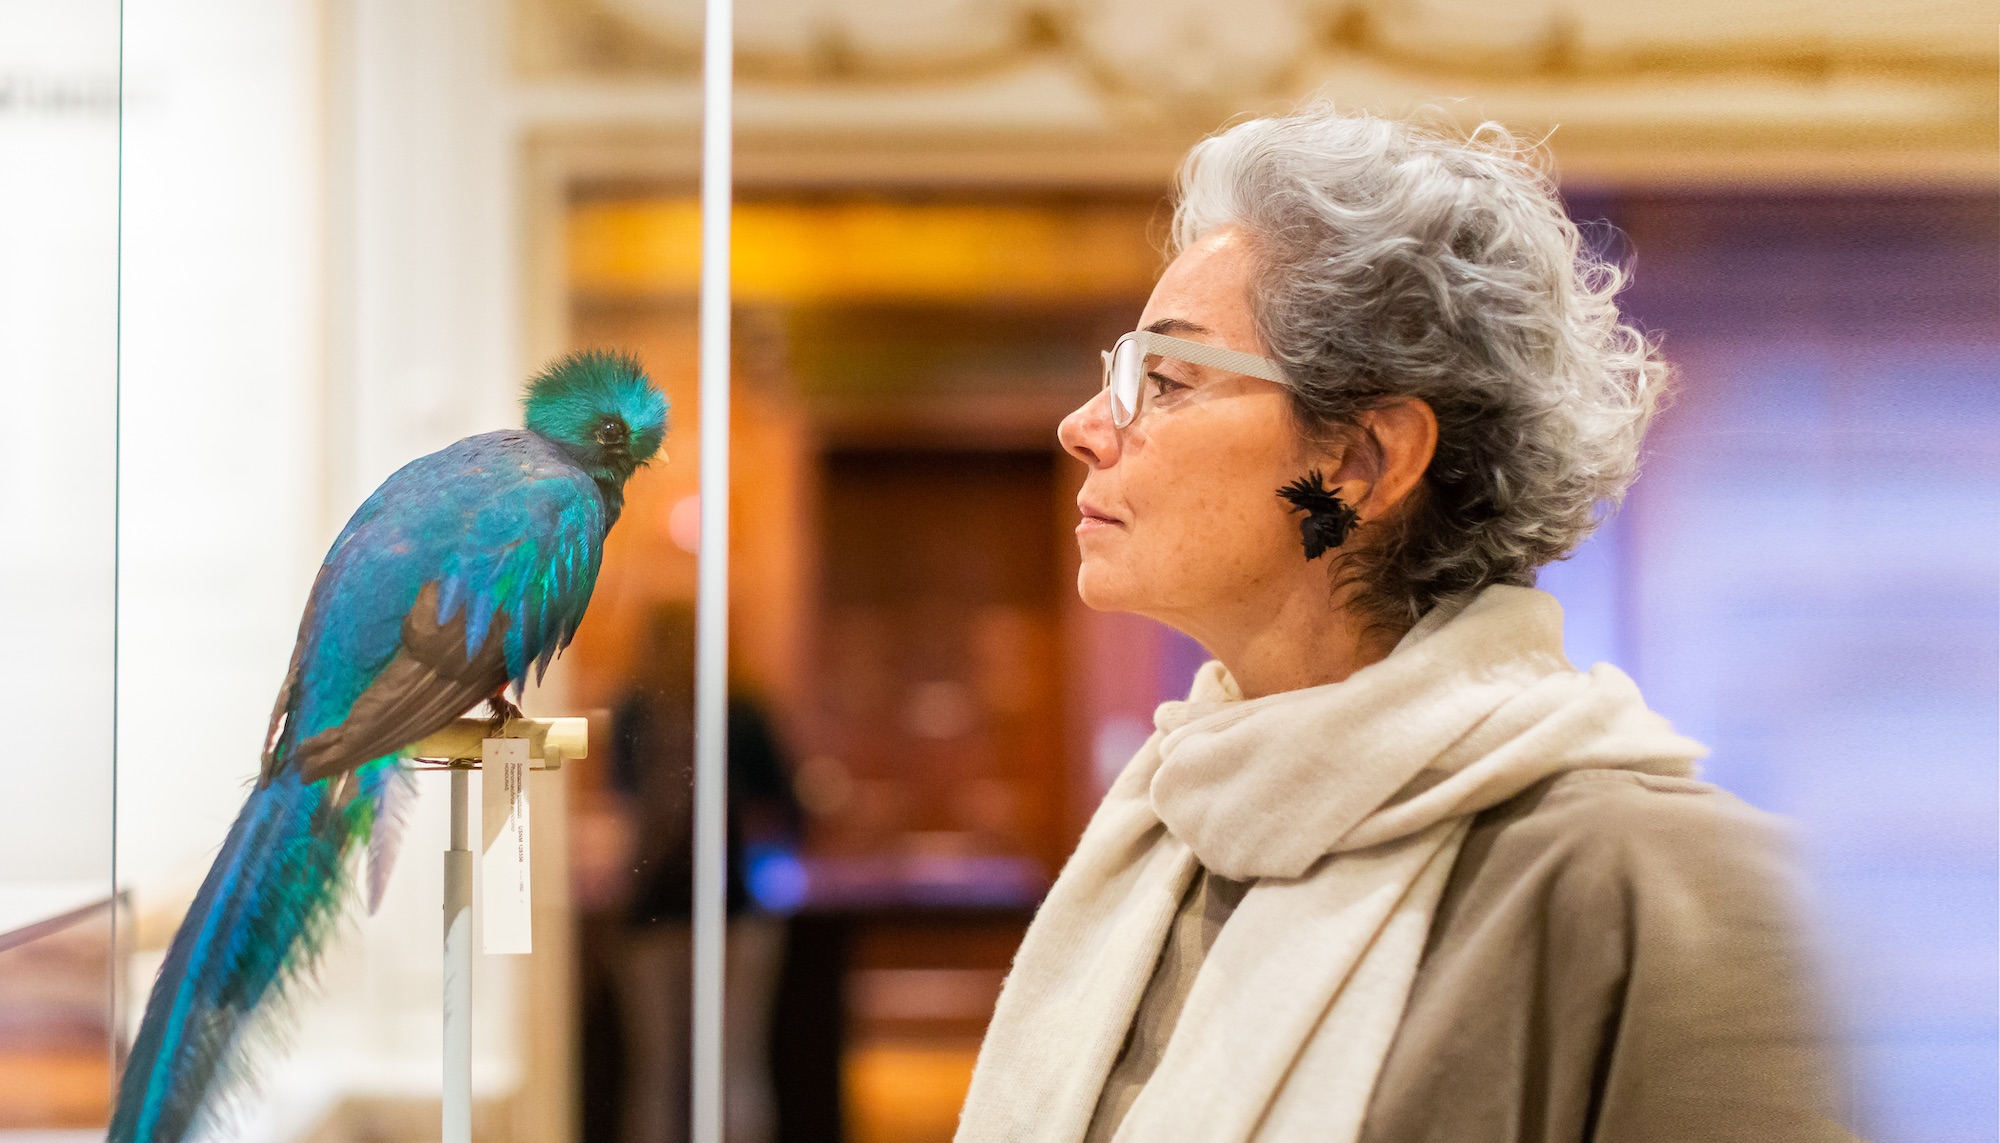 A woman wearing a cream-colored scarf and glasses gazes at a bright blue taxidermied bird at her eye level.